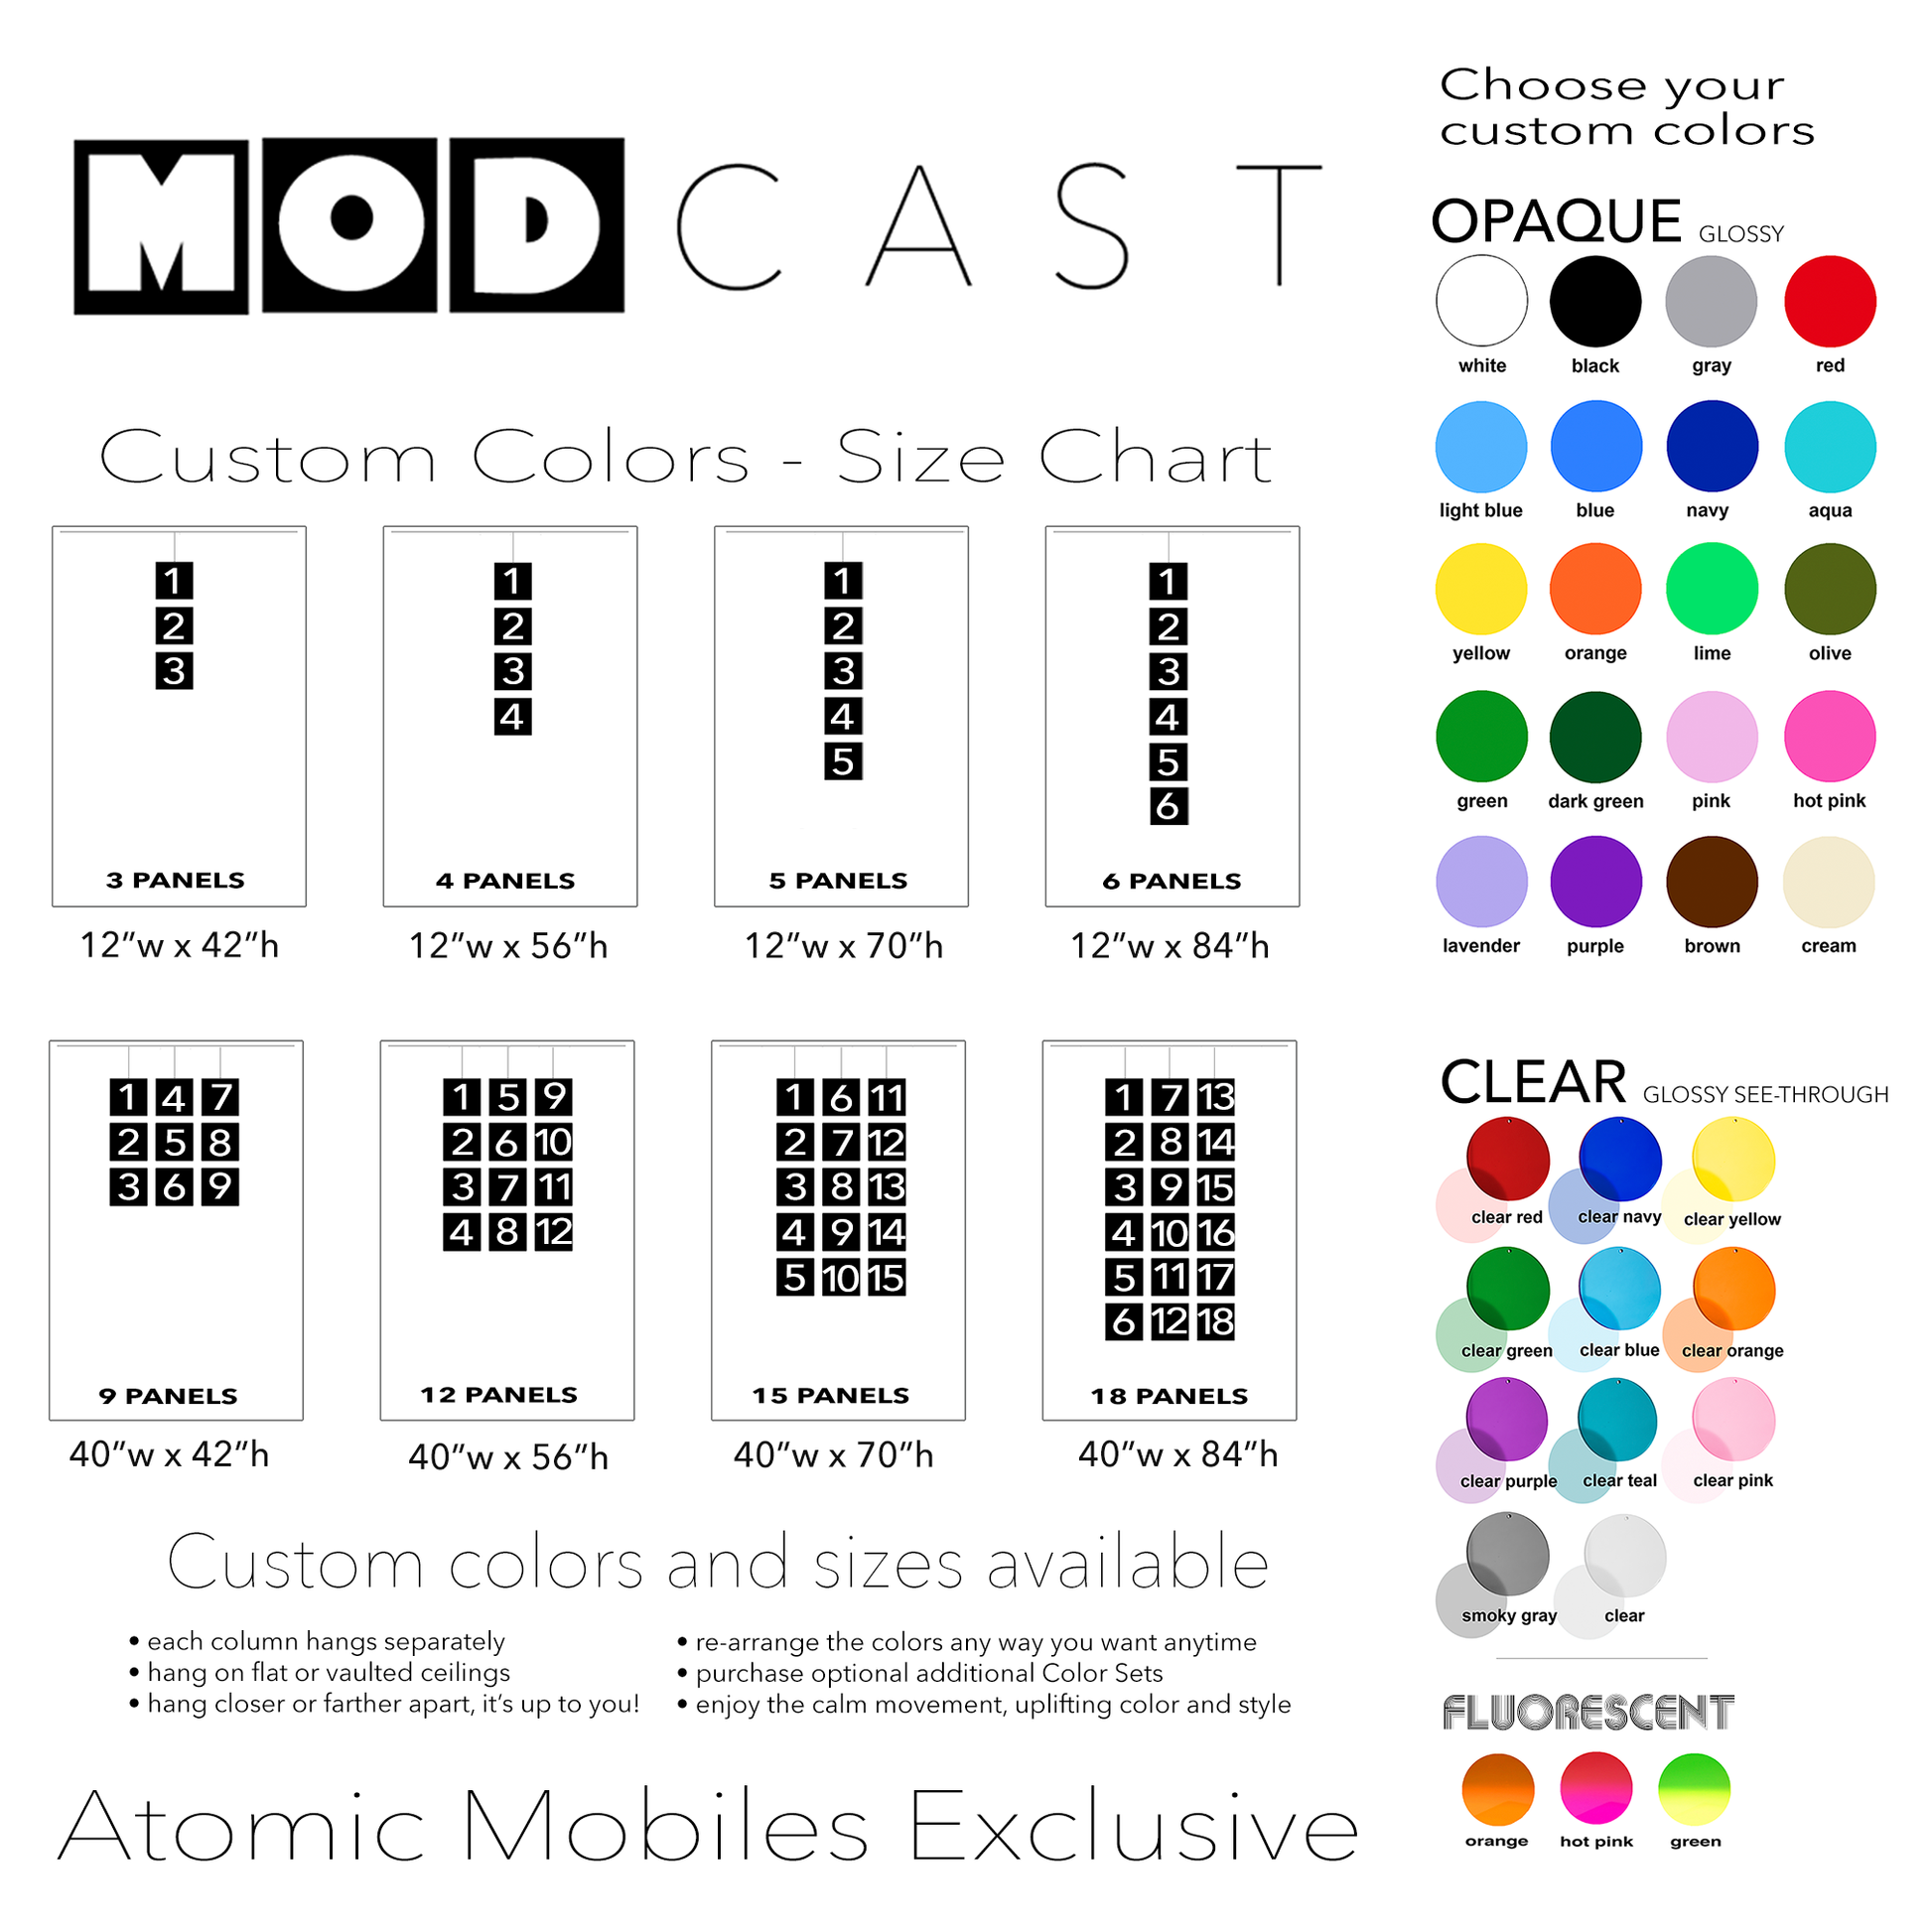 Color Chart and Sizes for MODcast hanging art mobiles in 34 acrylic plexiglass colors - kinetic mid century modern style home decorations by AtomicMobiles.com